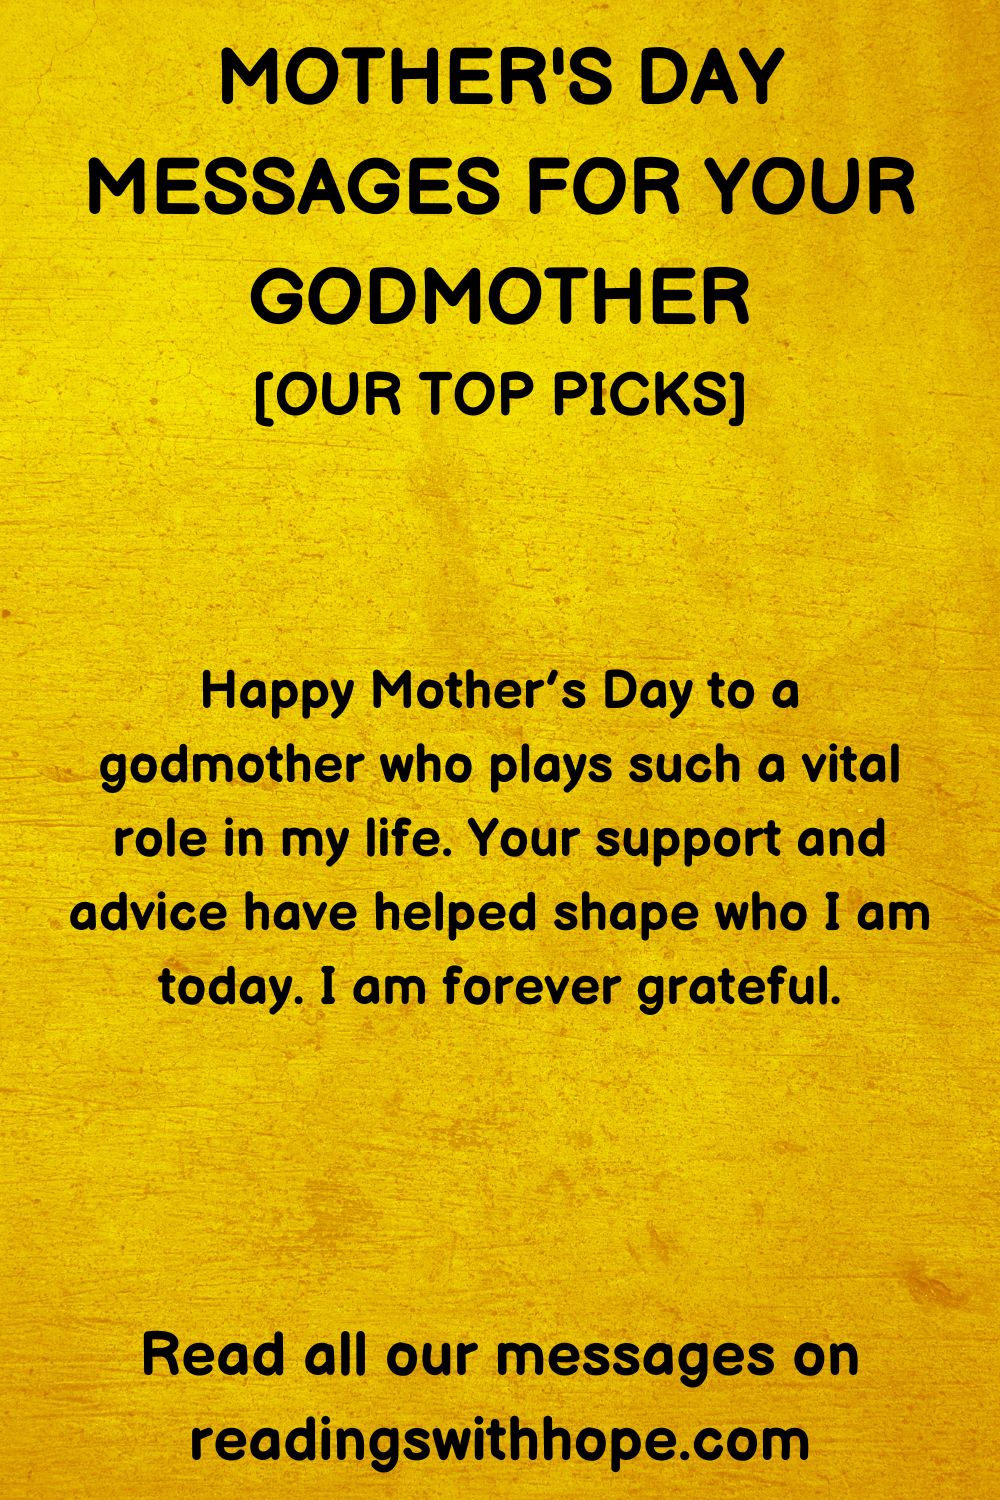 44 Mother's Day Messages for Your Godmother